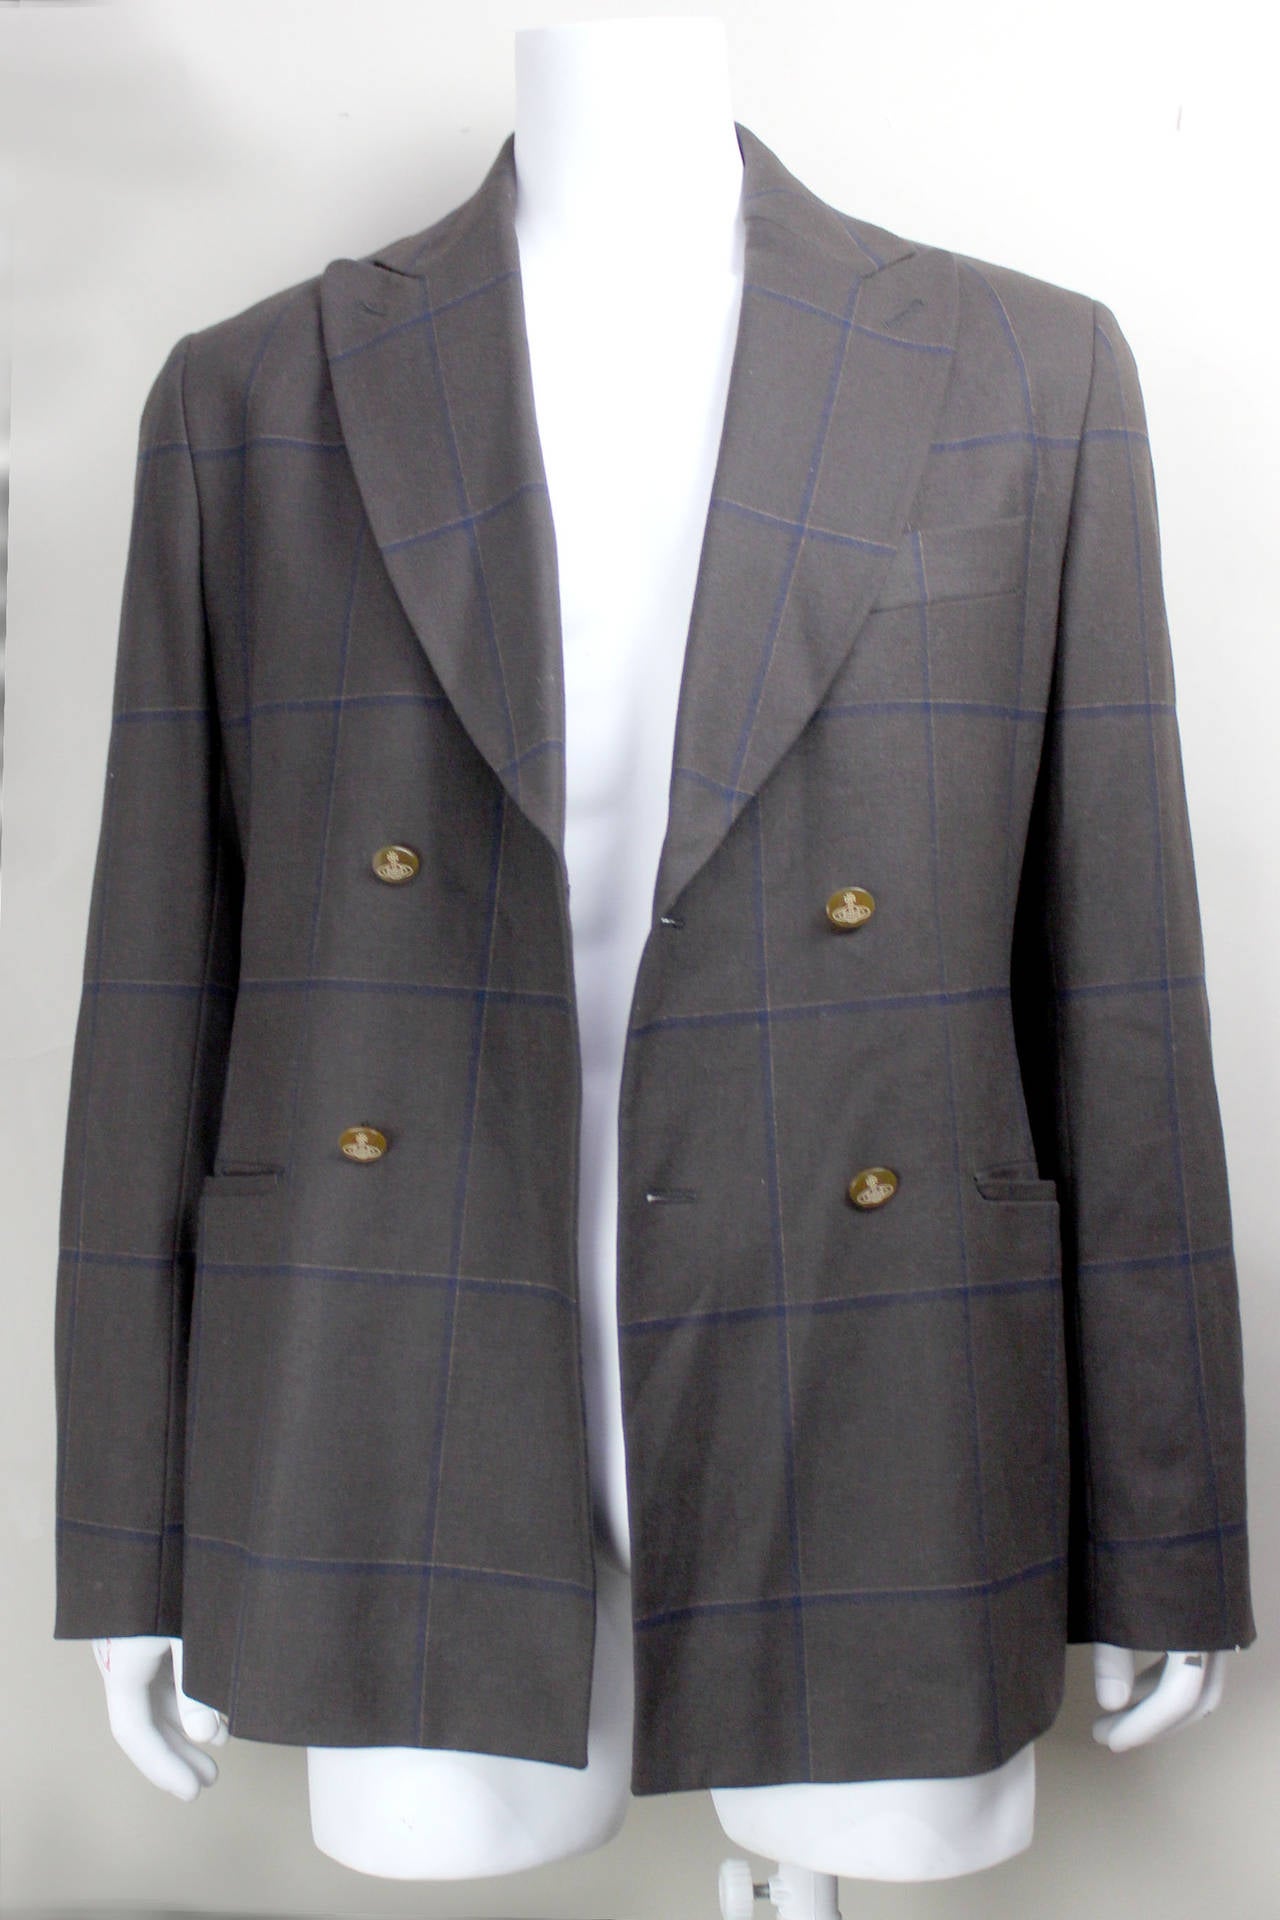 This handsome double breasted jacket features one of Westwood's iconic tartan patterns. Since her Anglomania collection (AW 93/94) tartan prints have been a staple in Westwood's collections. This classic jacket is done in a stone grey with navy and